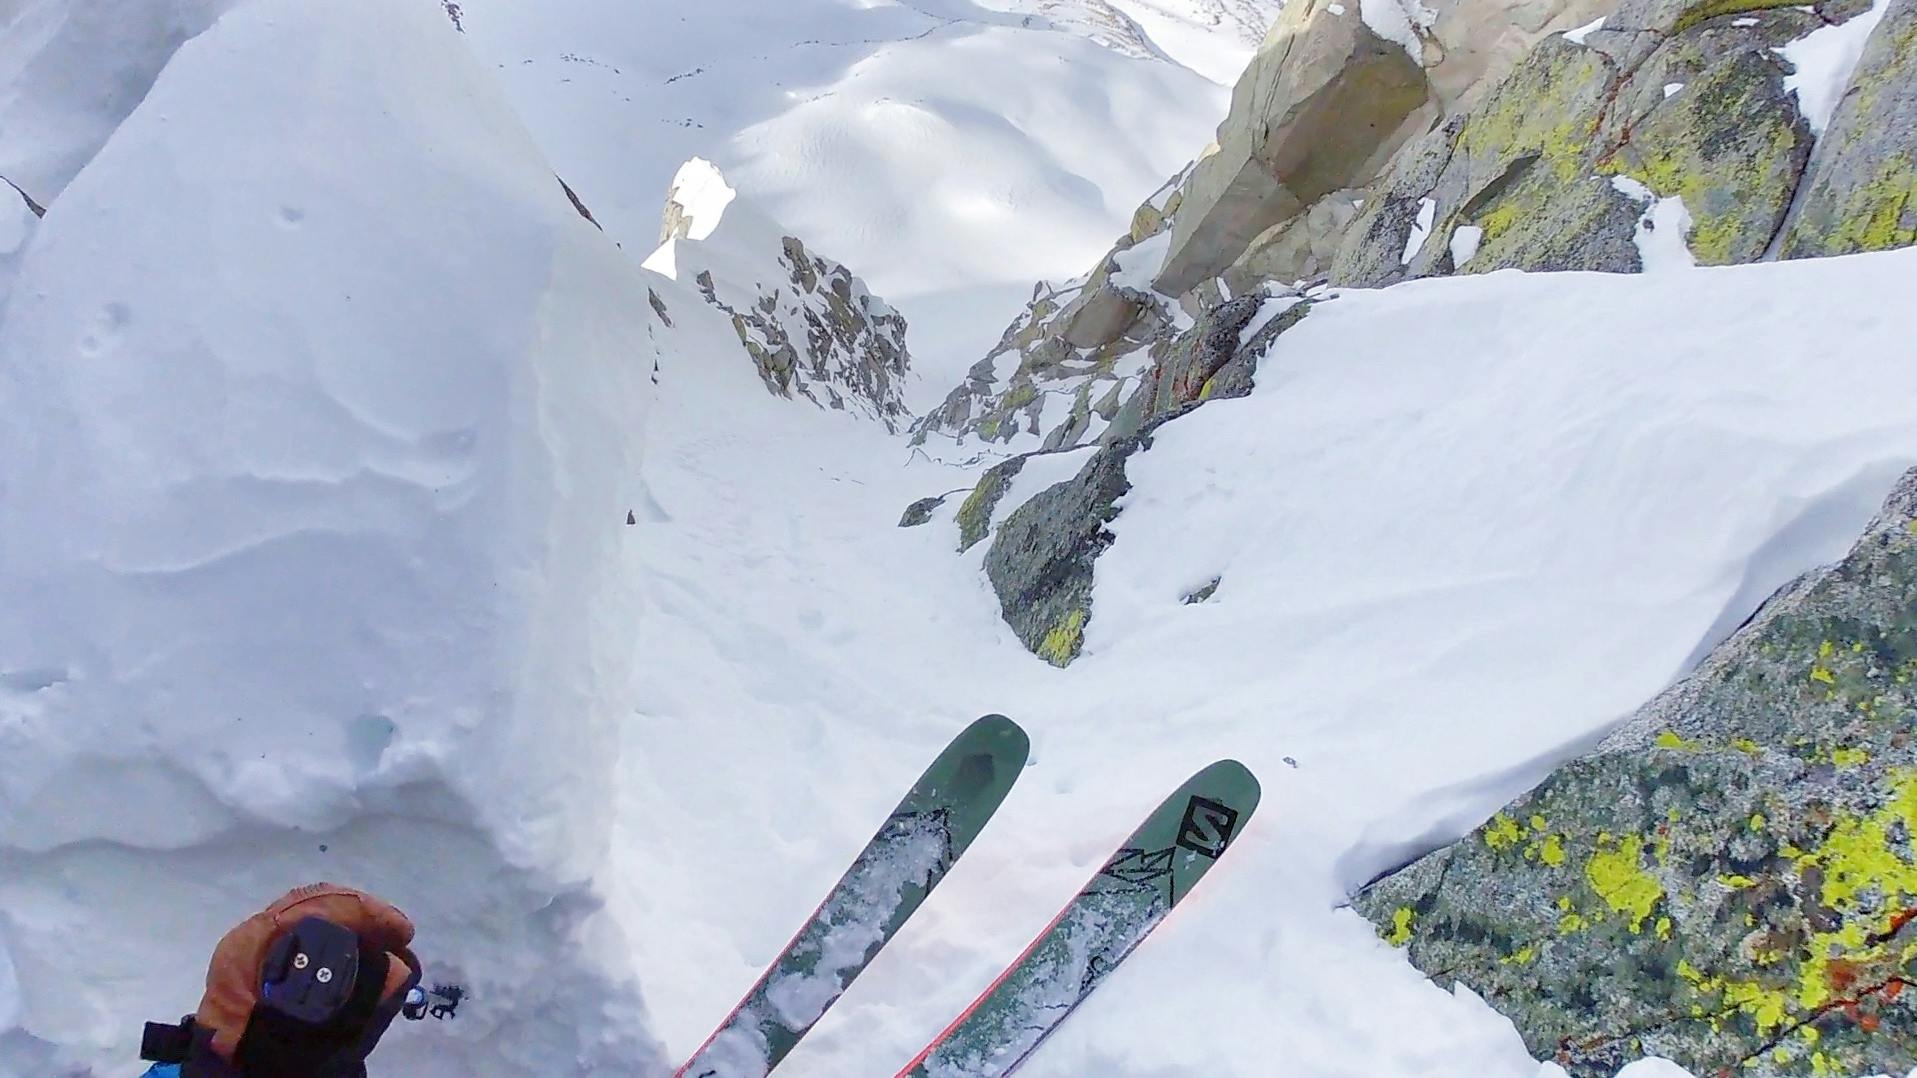 The image looks down at Josh Daiek's skis as he's perched on a steep decline.